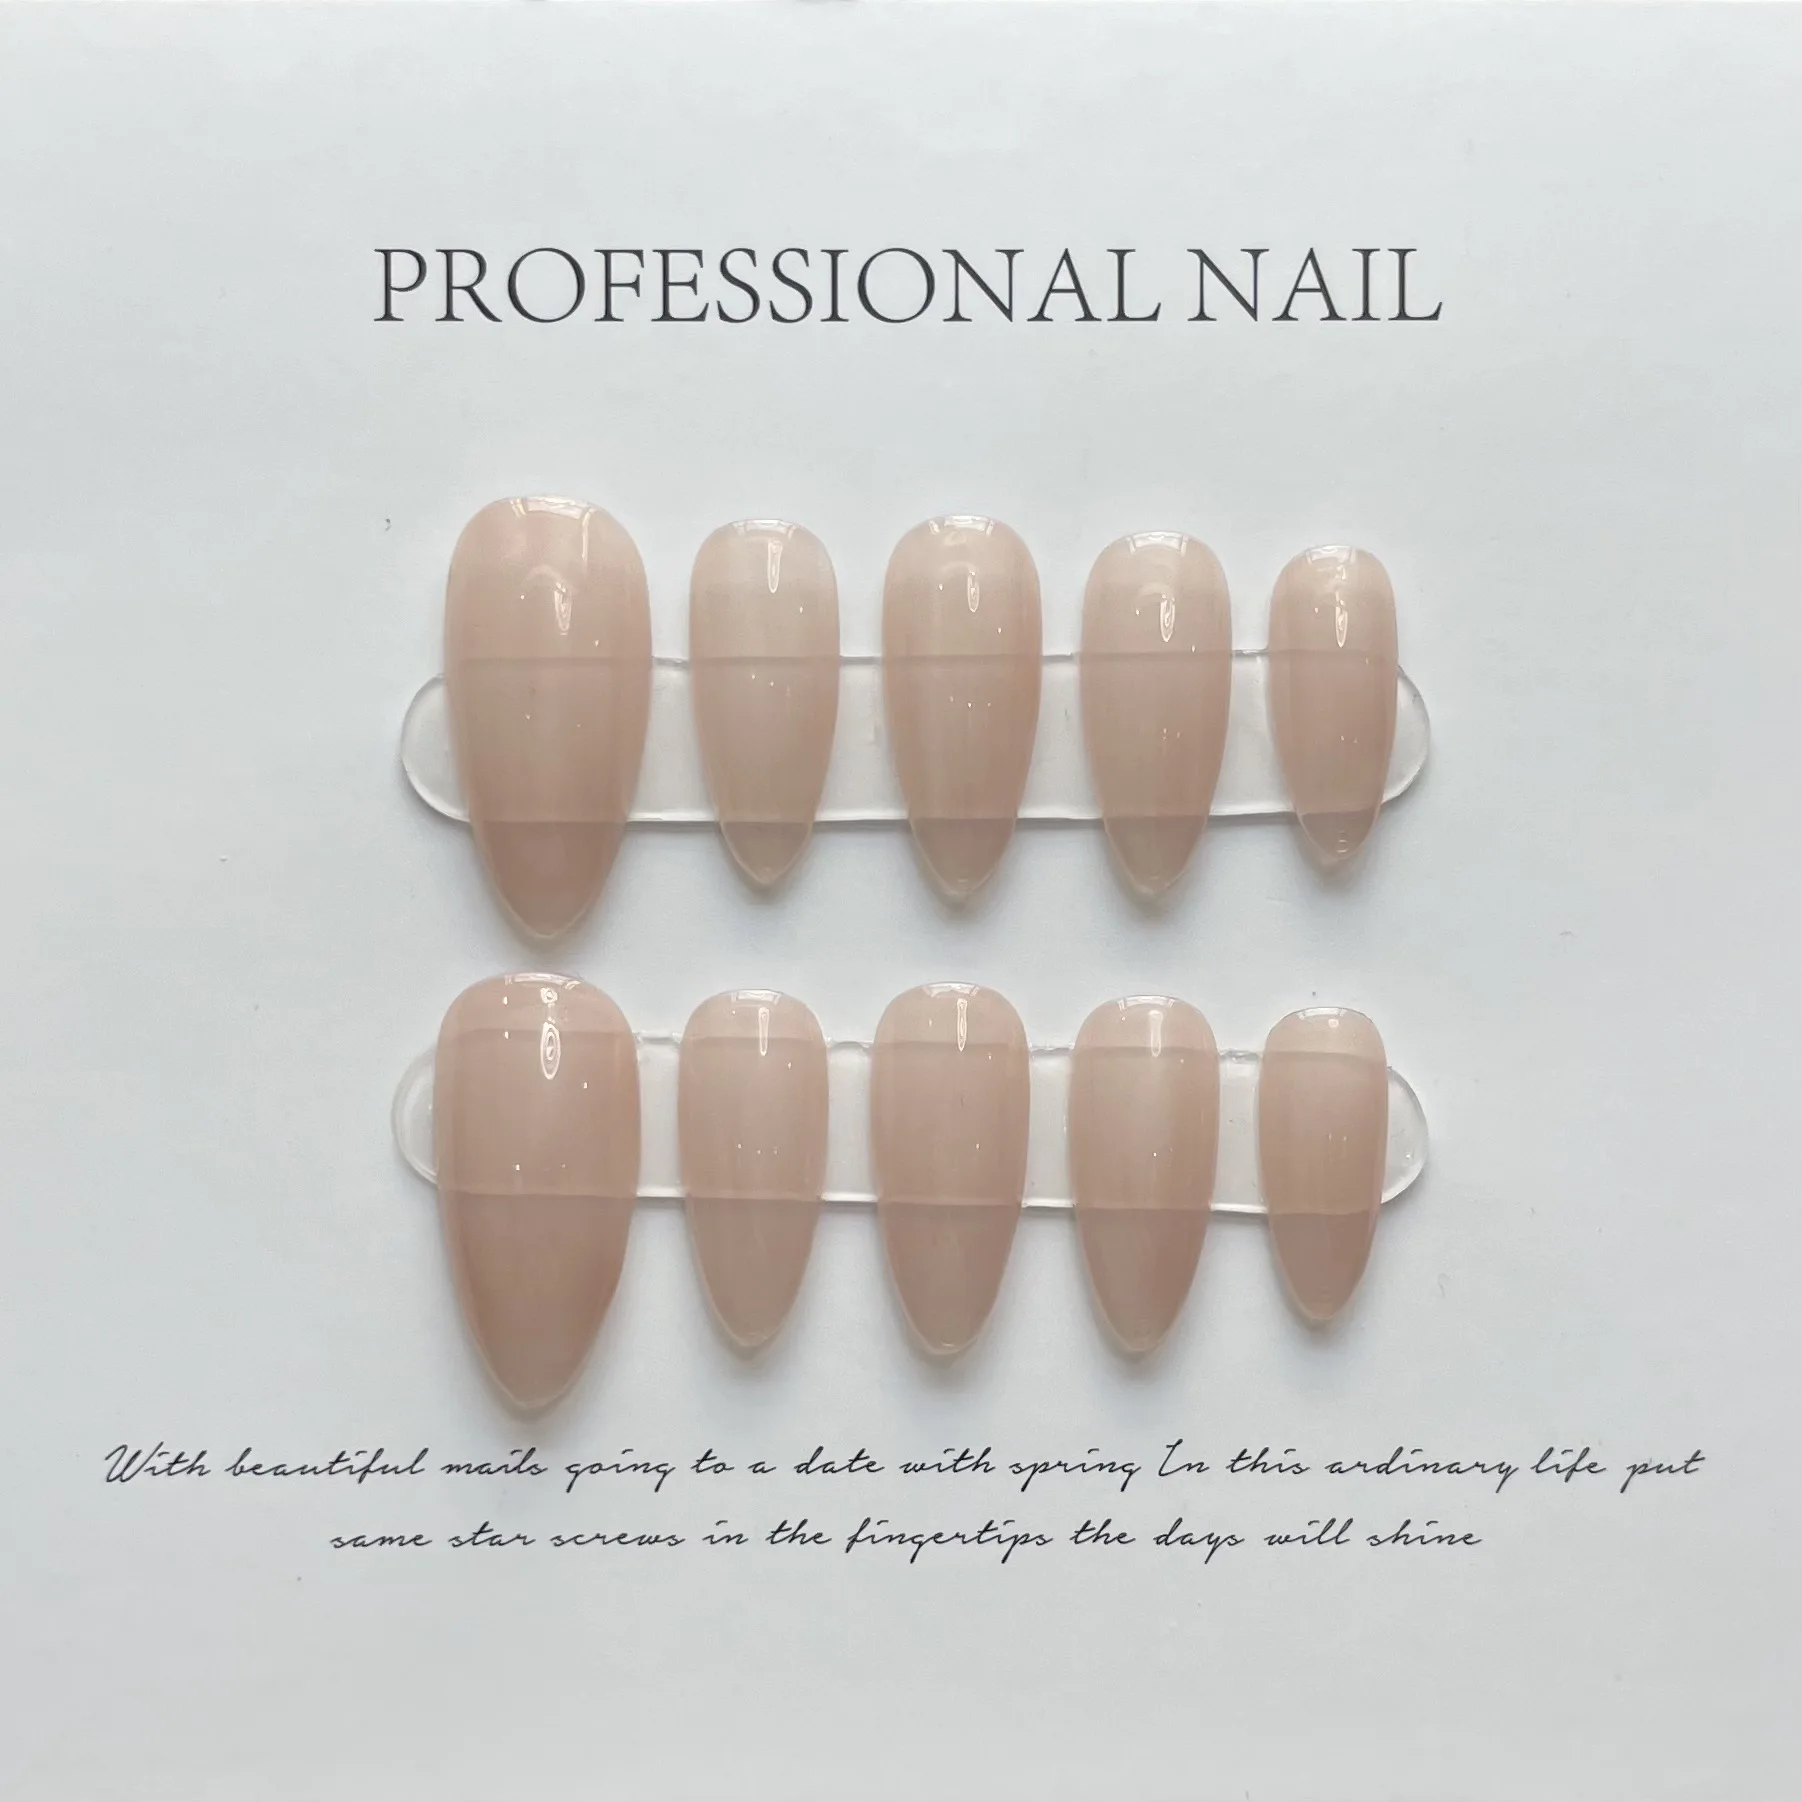 

531-545 Number Punk Ballet Handmade Nails With Bling Bricks Professional Wearable Advanced Press On Nails Artificial Manicuree